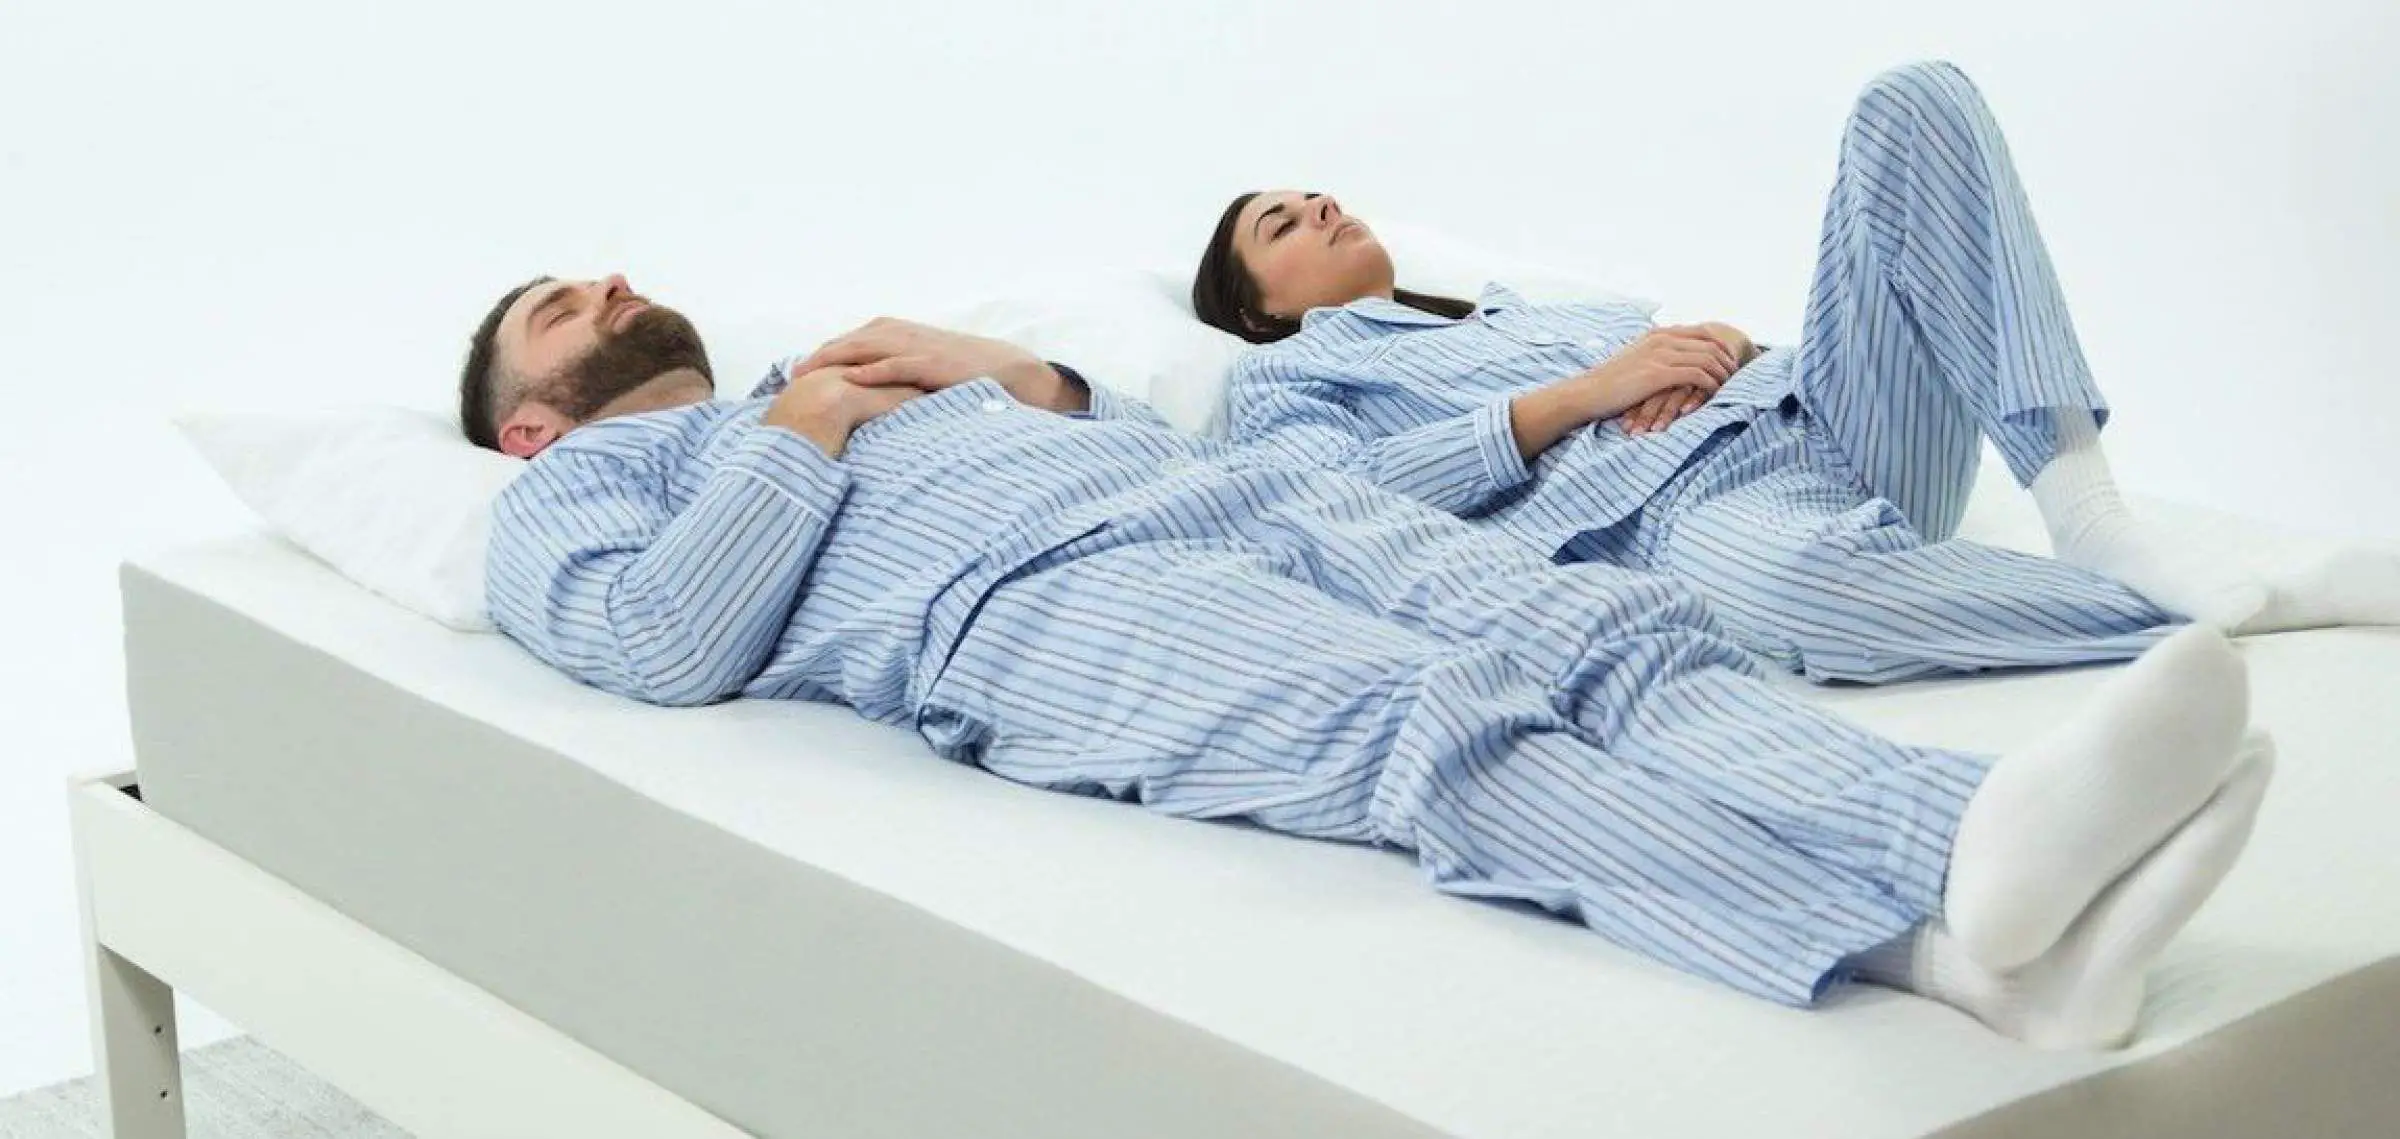 Top 10 Tips for Choosing Best Sleeping Mattress for Couples